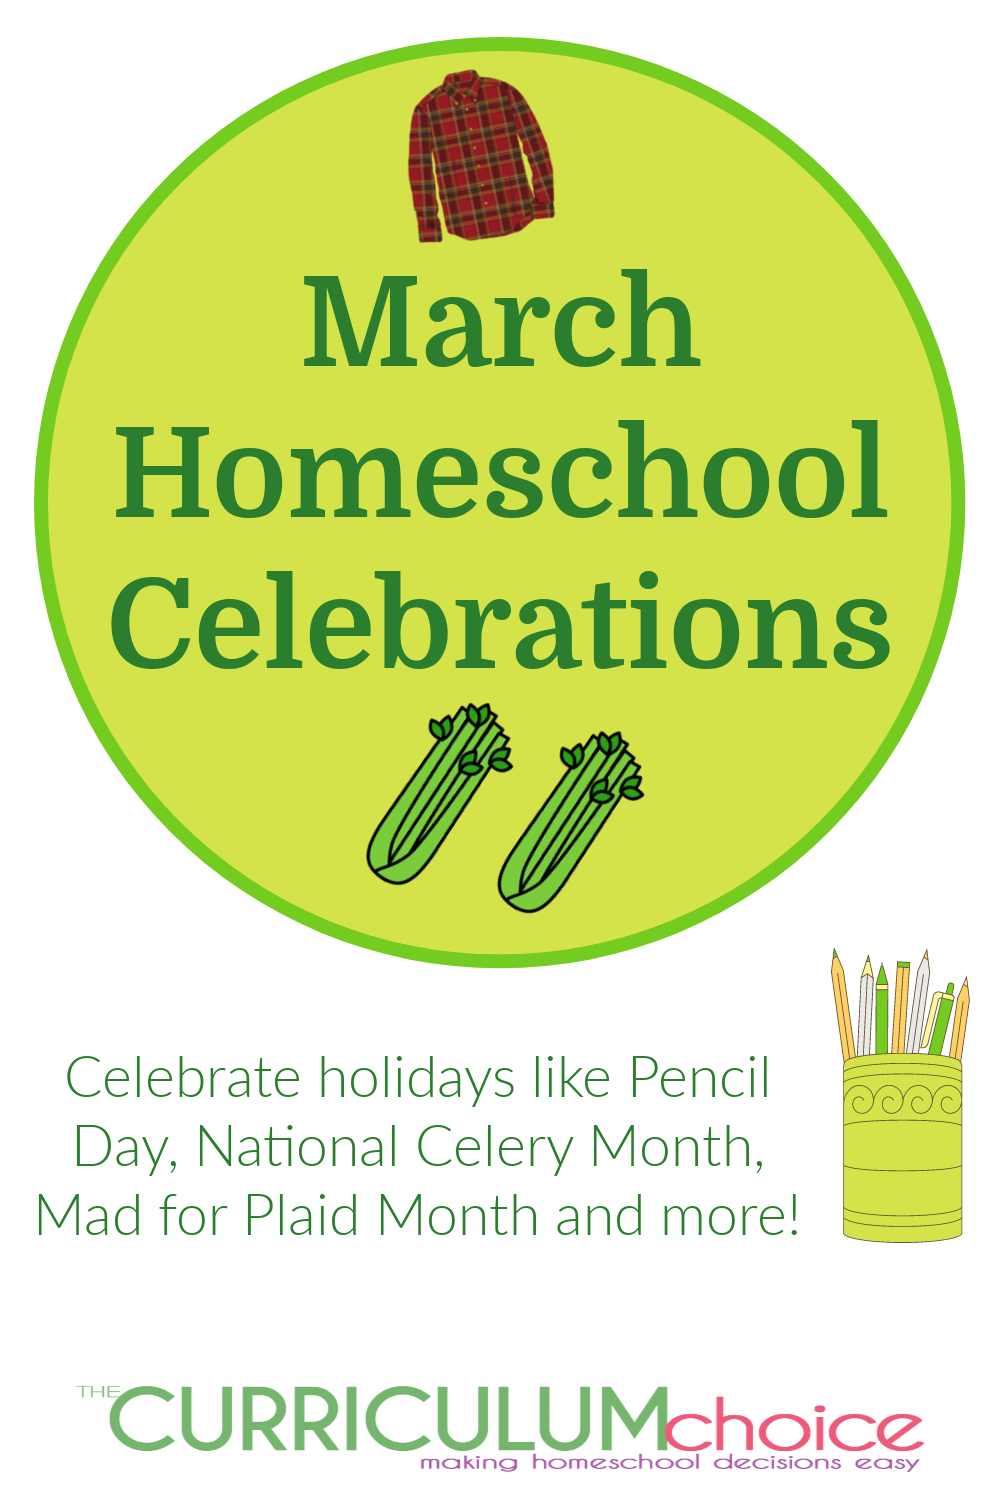 Celebrate every moment of March with these March homeschool celebrations! Celebrate Pencil Day, National Celery Month, Mad for Plaid Month and more!